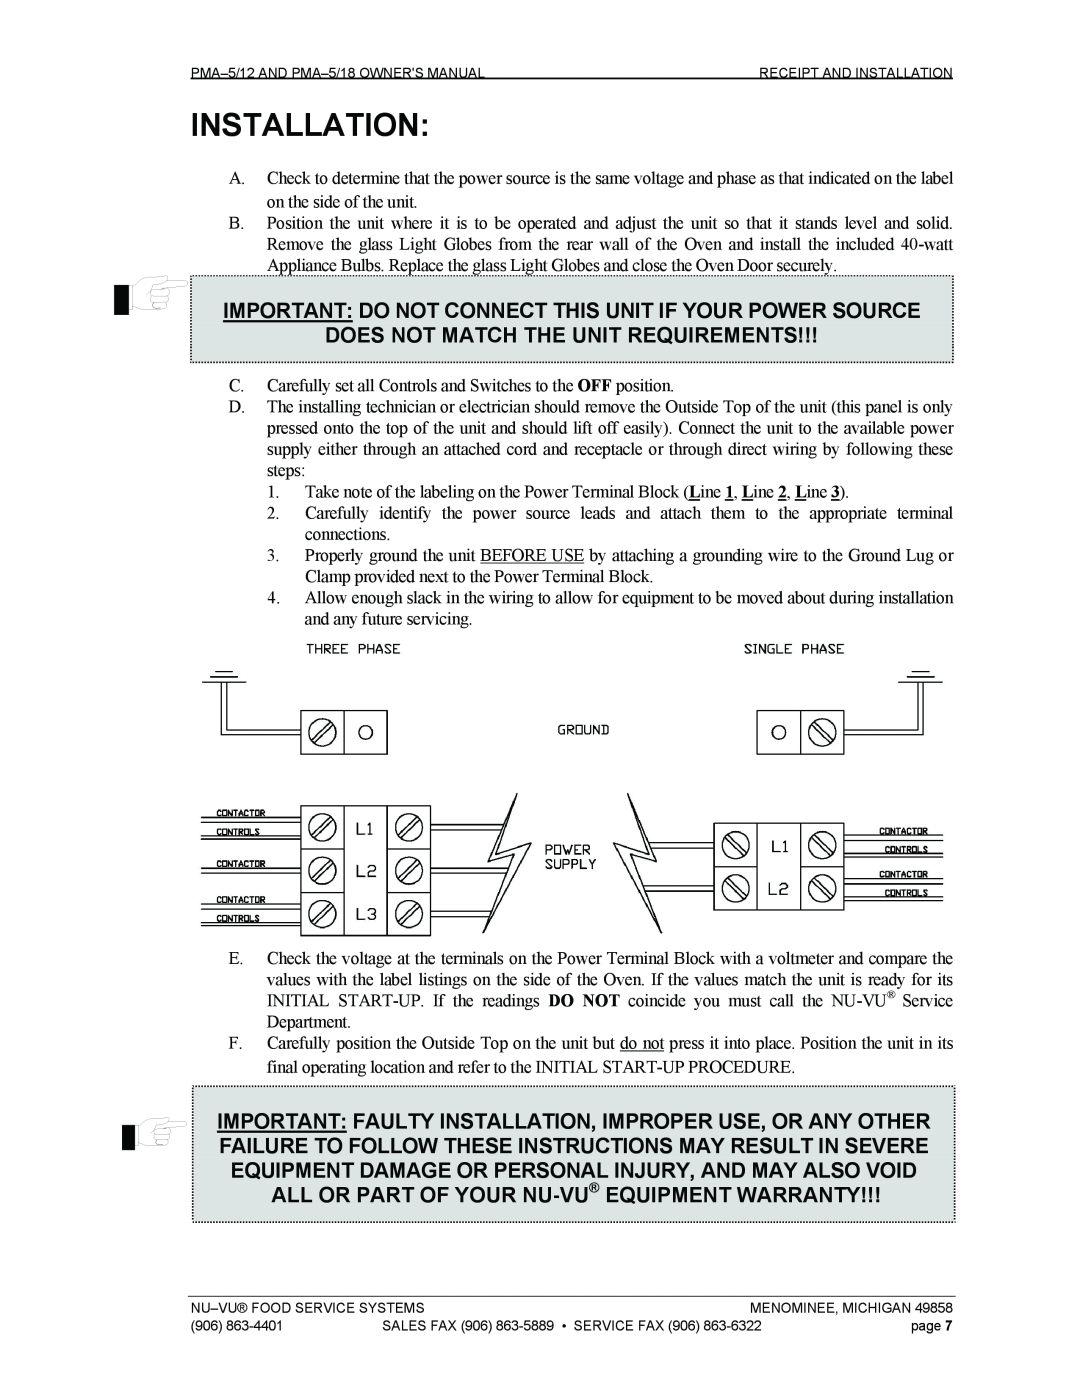 Nu-Vu PMA -5/12, PMA 5/18 owner manual Installation, Does Not Match The Unit Requirements 